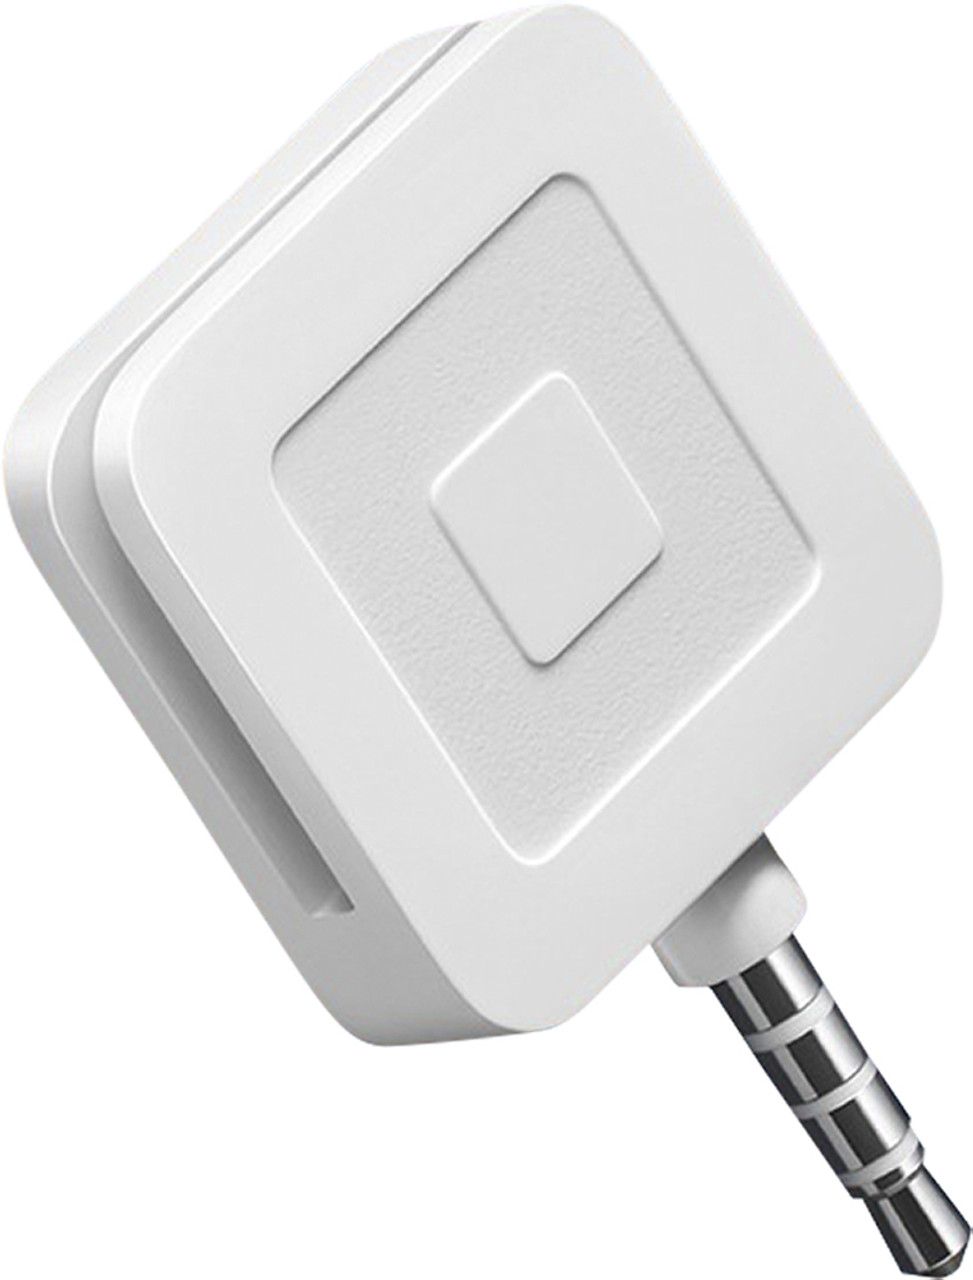 Square - Magstripe Reader with 3.5mm Headphone Connector - White